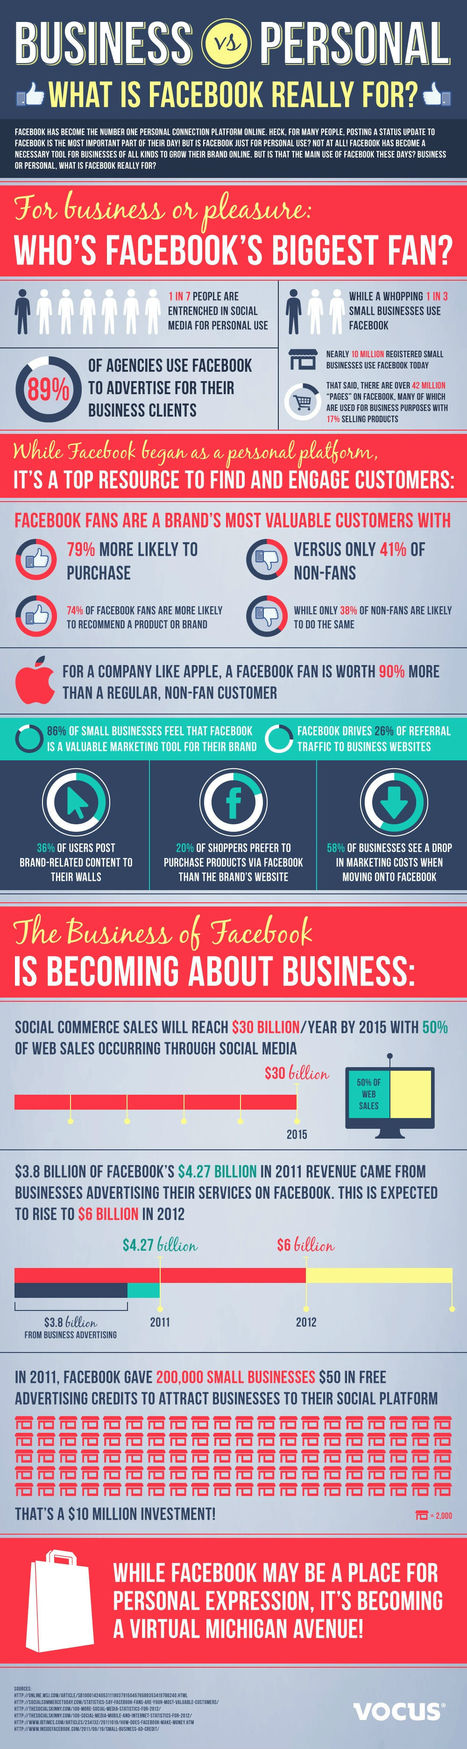 Why Sales on Social Media Will Be Huge By 2015 [INFOGRAPHIC] | Digital-News on Scoop.it today | Scoop.it